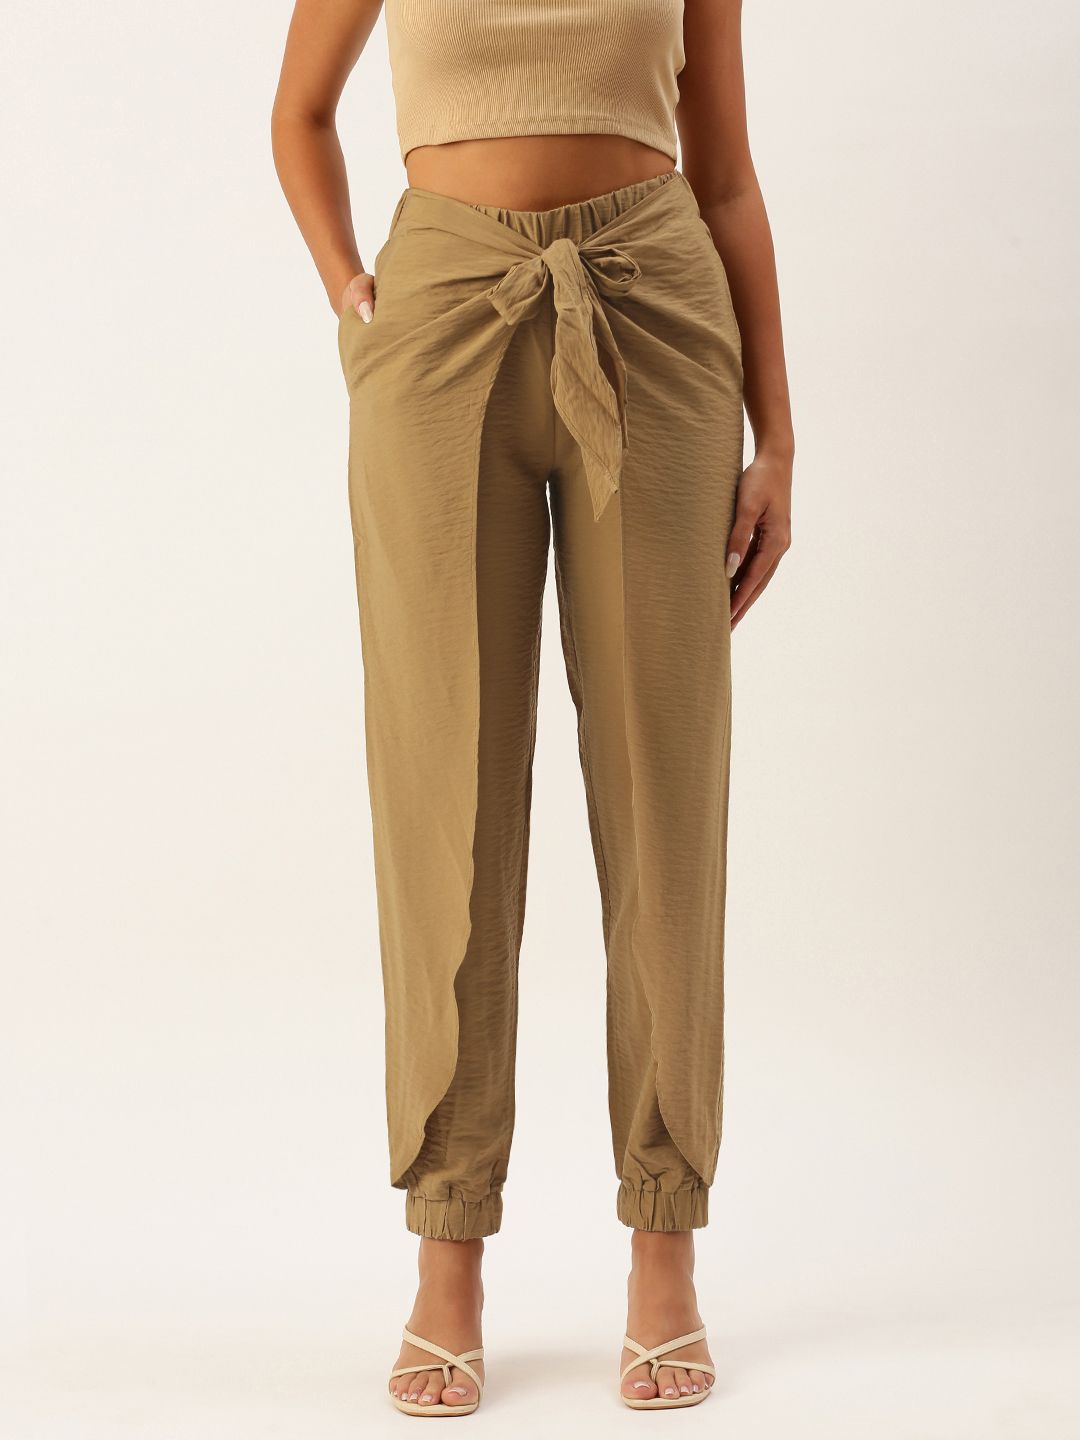 FOREVER 21 Women Beige Solid Joggers Trousers With Overlap Detailing Price in India